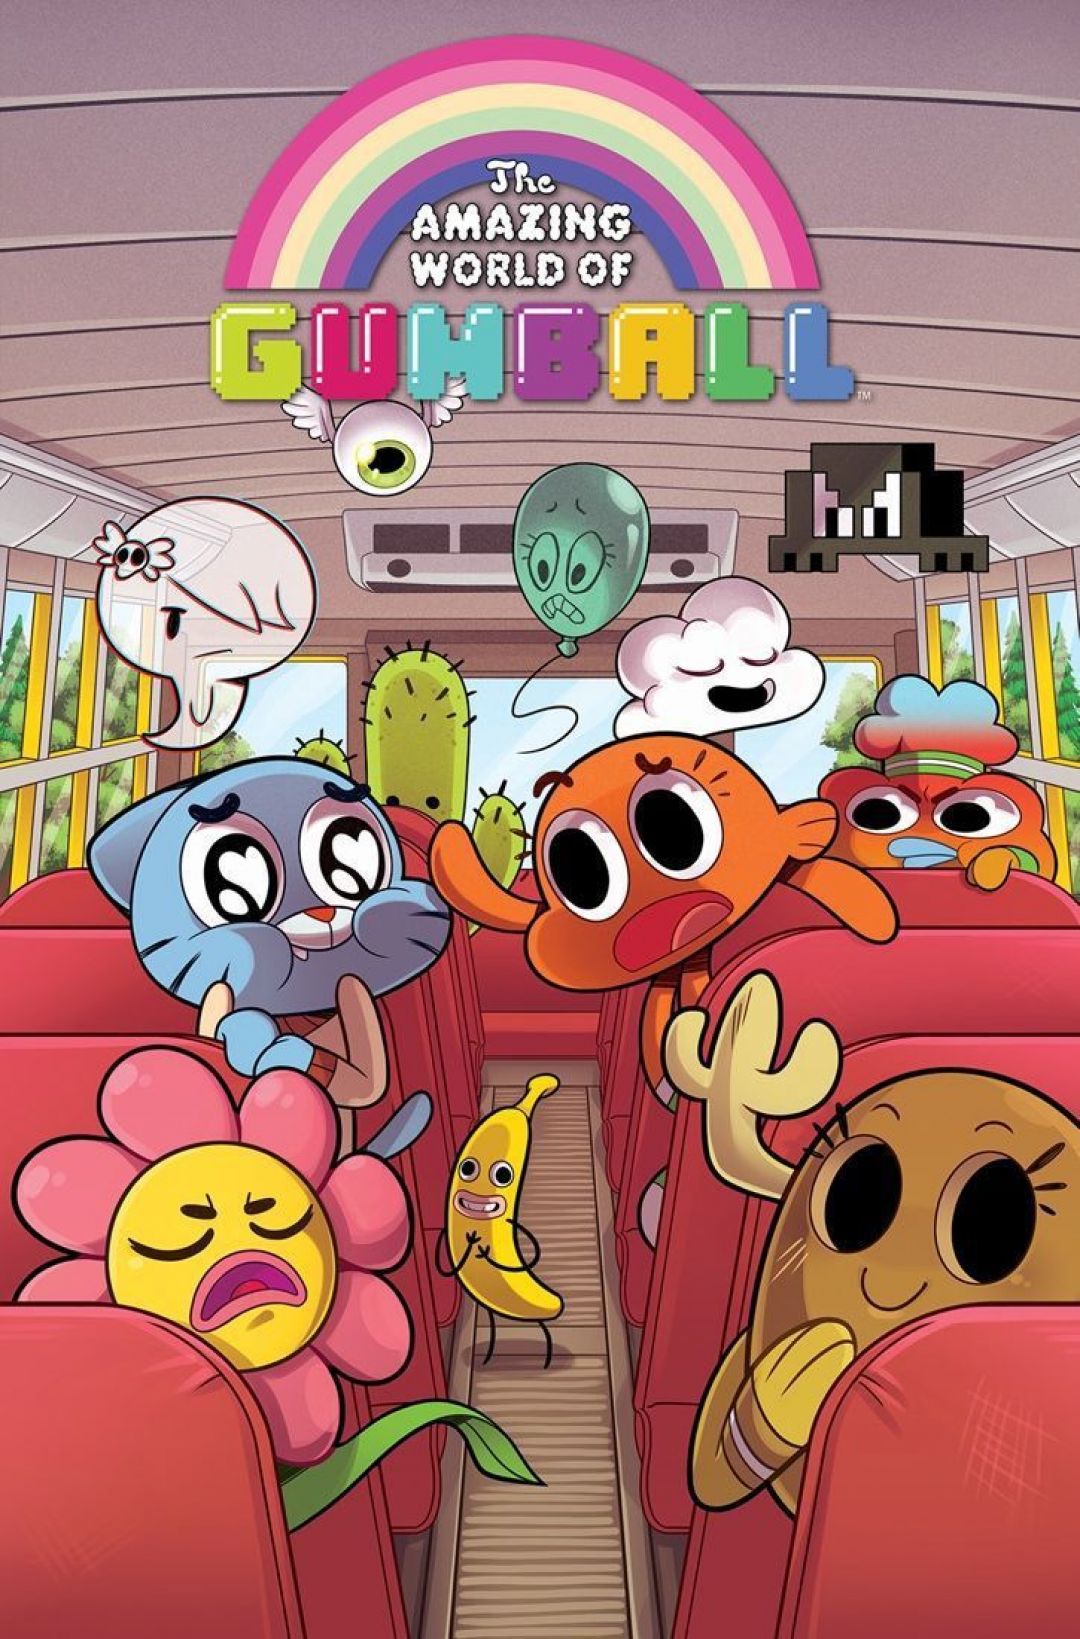 Gumball Iphone Wallpapers